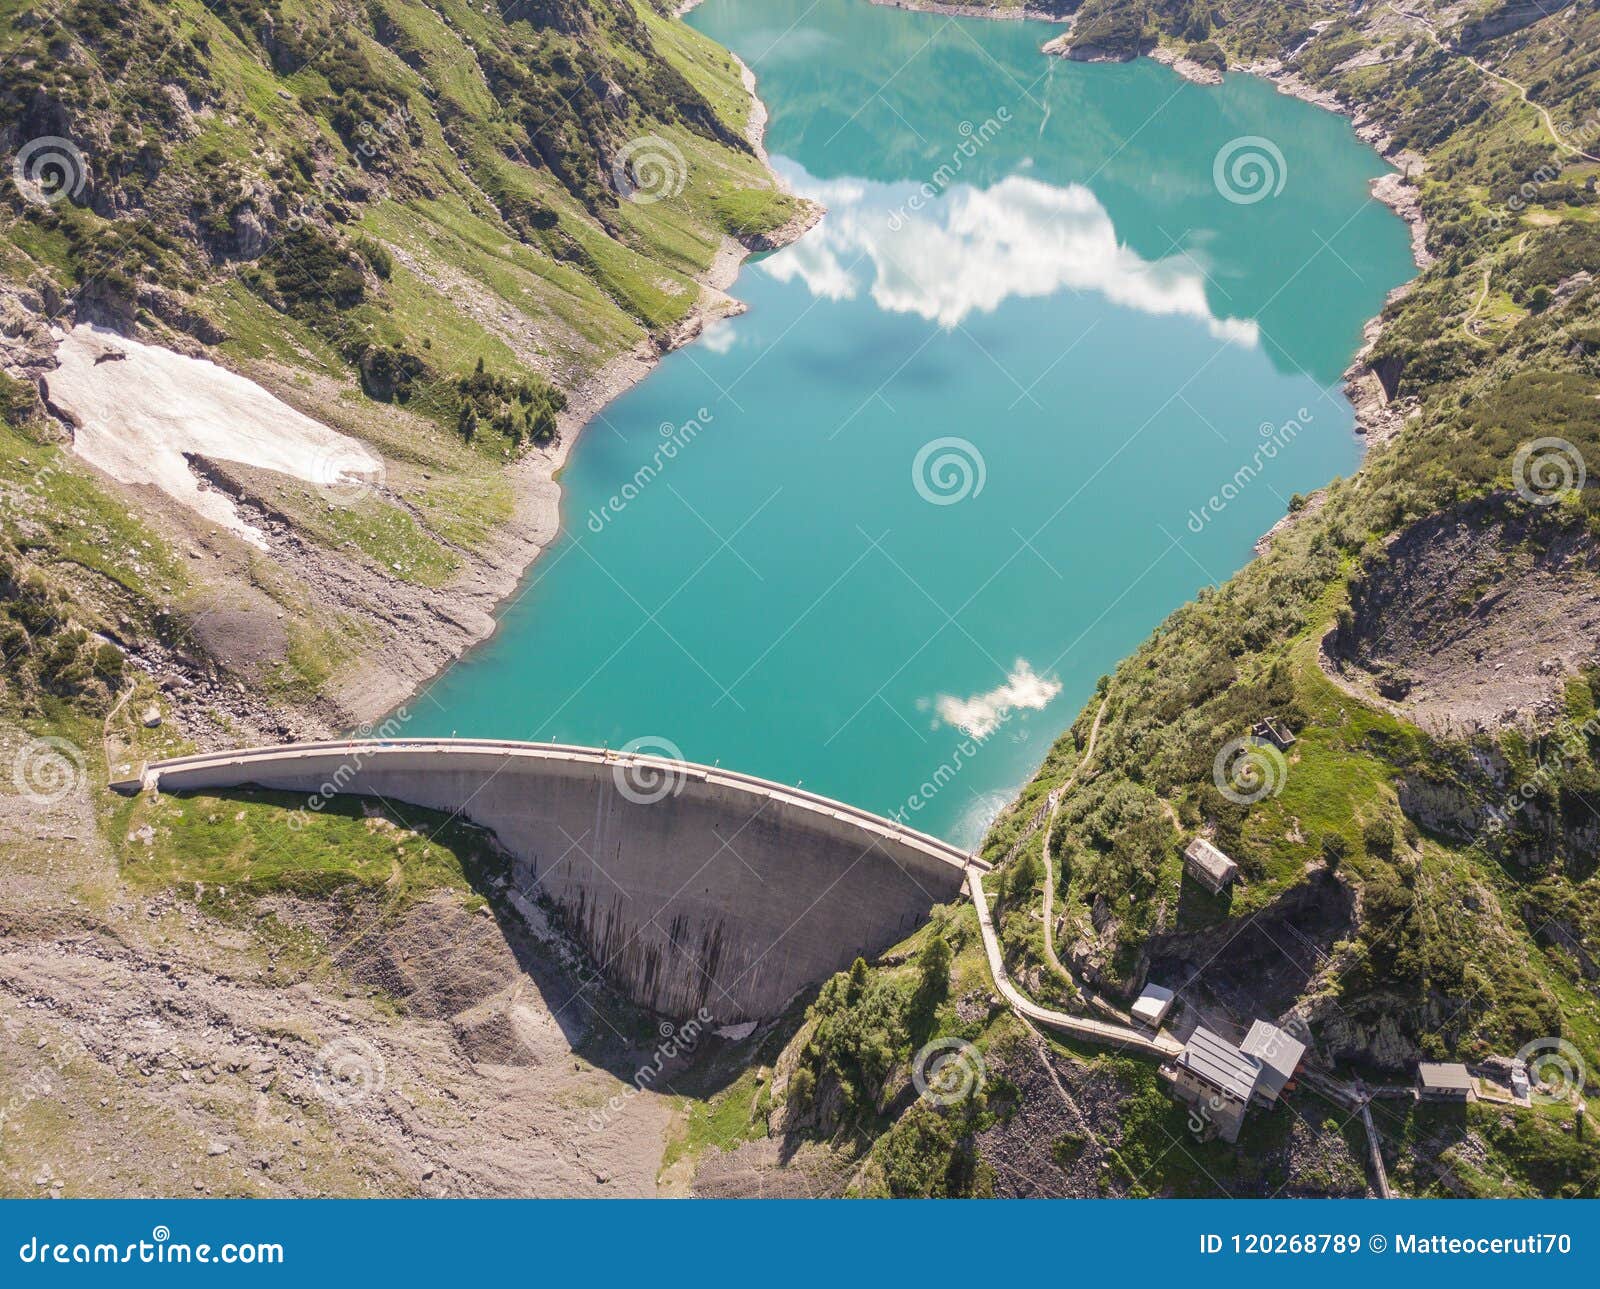 drone aerial view of the lake barbellino an alpine artificial lake and the mountain around it. italian alps. italy